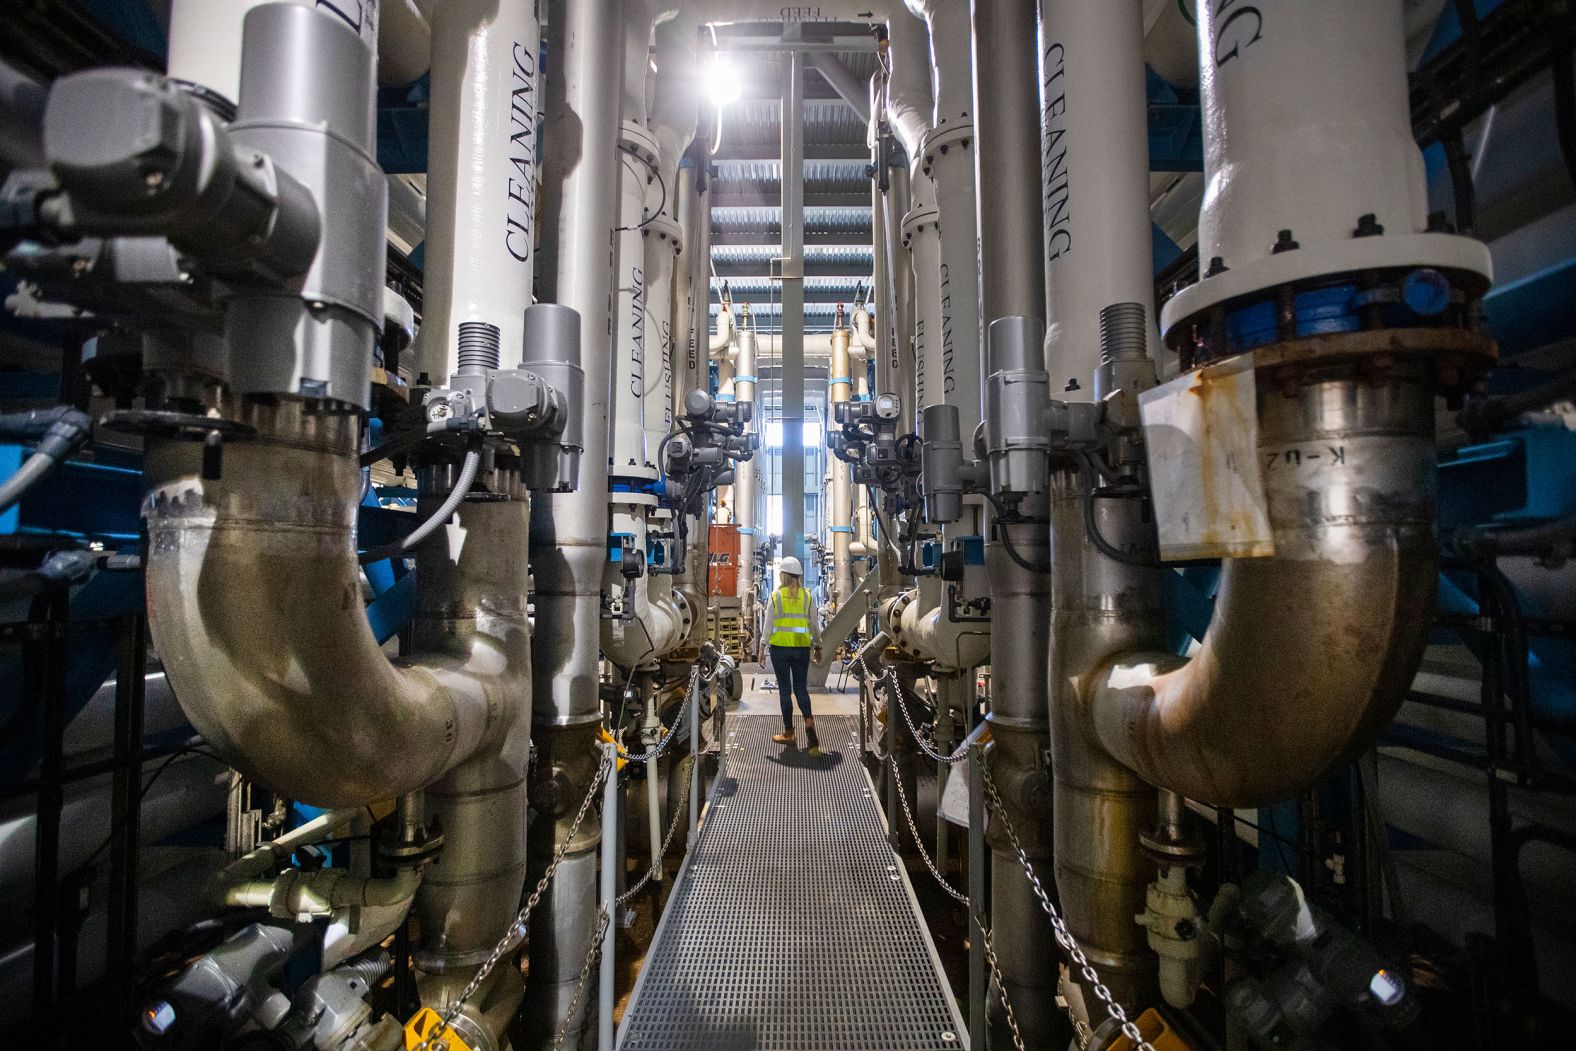 Michelle Peters, a technical and compliance manager for Poseidon Water, walks through the reverse osmosis building at the Claude Lewis Carlsbad Desalination Plant in Carlsbad, California, on March 30. The plant converts ocean water into municipal water. In August, Gov. Gavin Newsom laid out a <a href="https://www.cnn.com/us/live-news/lake-mead-colorado-river-report/h_8b9a61776c746ca11392b63b158381f6" target="_blank">multi-billion-dollar plan</a> to preserve the state's diminishing water supply for future years, which includes recycled water projects such as desalination of ocean water and salty water in groundwater basins.